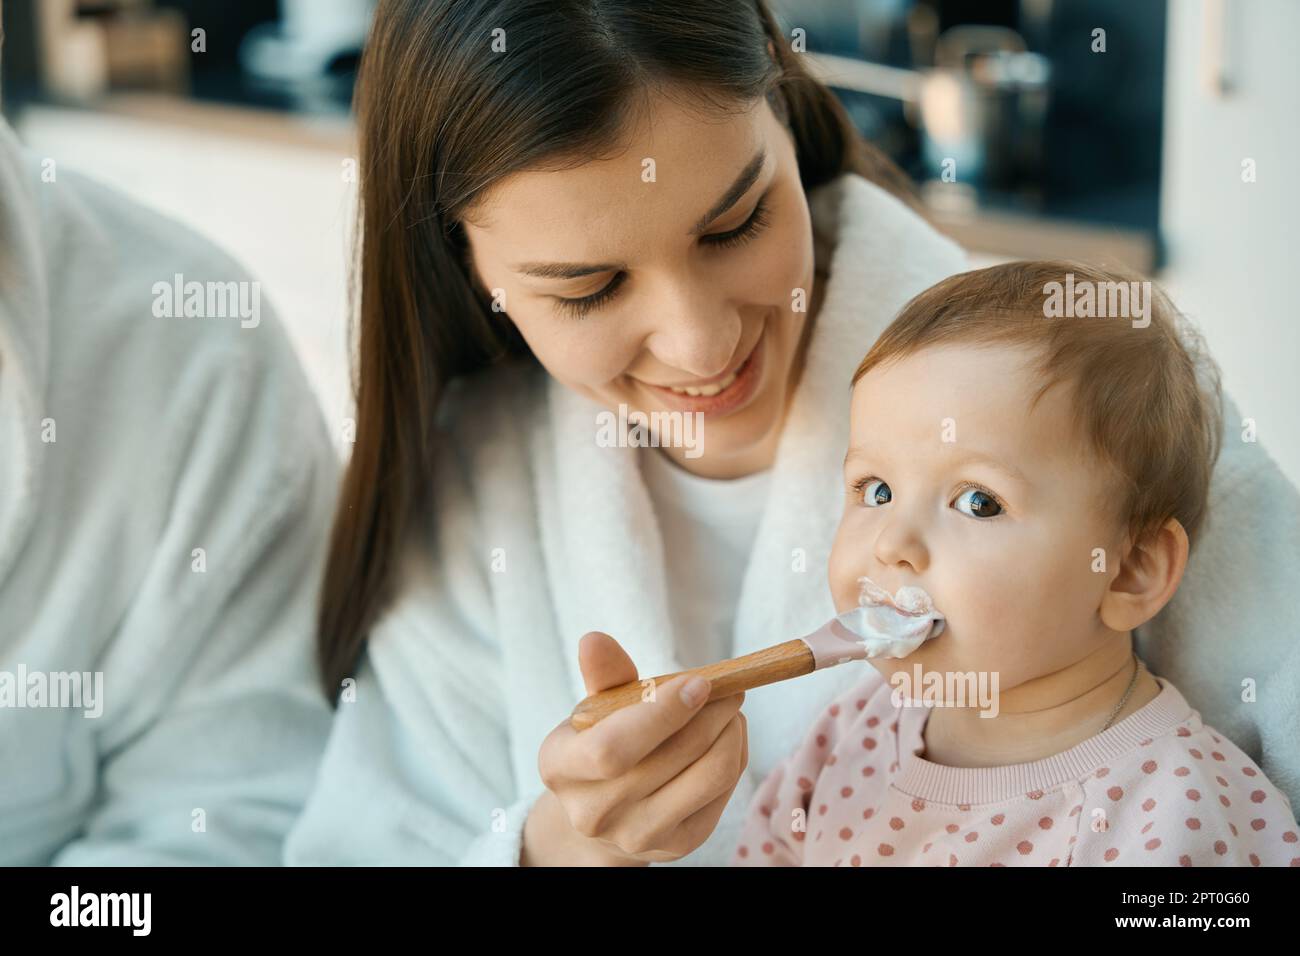 Happy female feeds the baby with a small spoon, the girl has plump cheeks Stock Photo